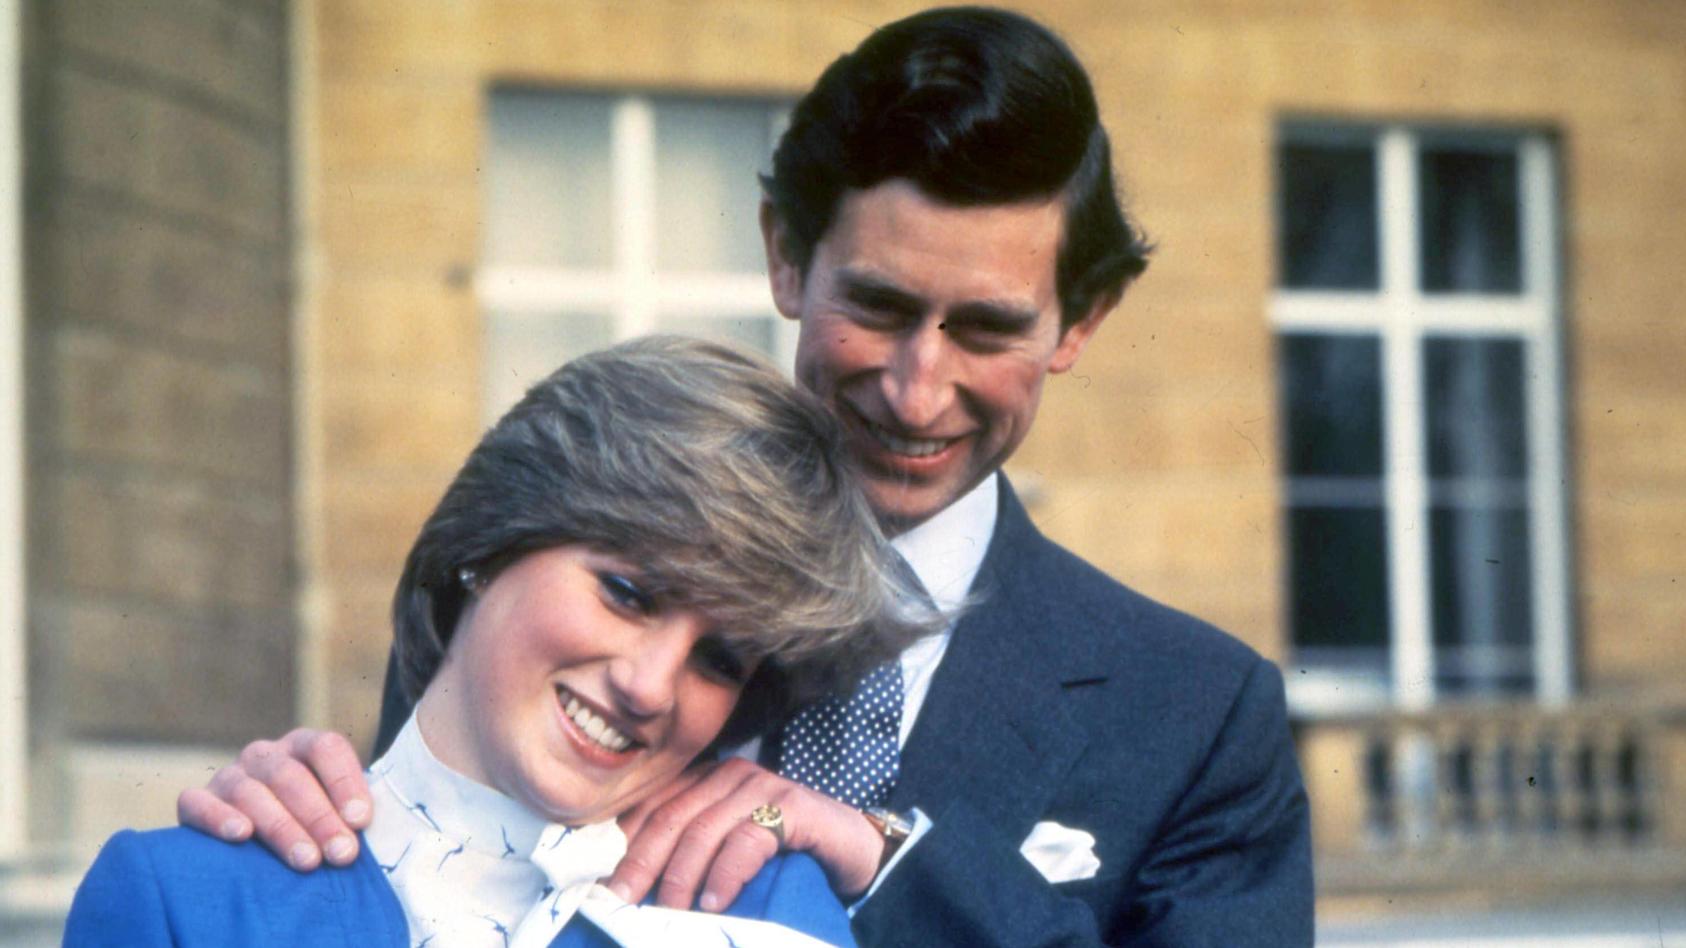  24th February 1981: Prince Charles and Lady Diana Spencer are engaged. Colour Medium Format Transparency AUFNAHMEDATUM GESCHÄTZT UnitedArchives0721490